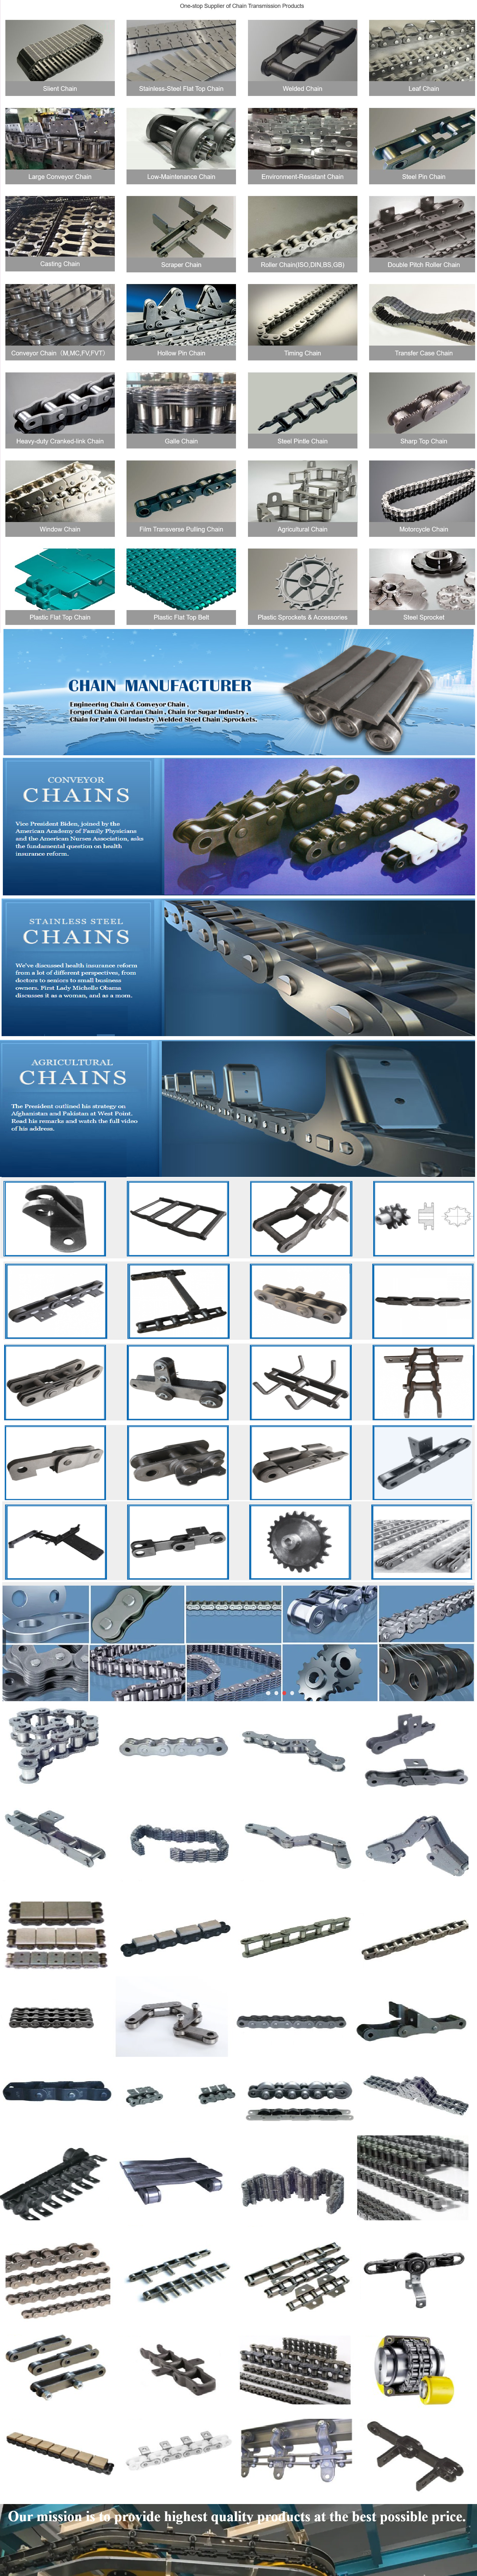 Best  made in China - replacement parts - Chain & sprocket manufacturer : Har-200fh  for replacement of tsubaki roller chain coupling China in Suweon Republic of Korea  Straight Flush Grid Modular Belt for Conveyor with ce certificate top quality low price